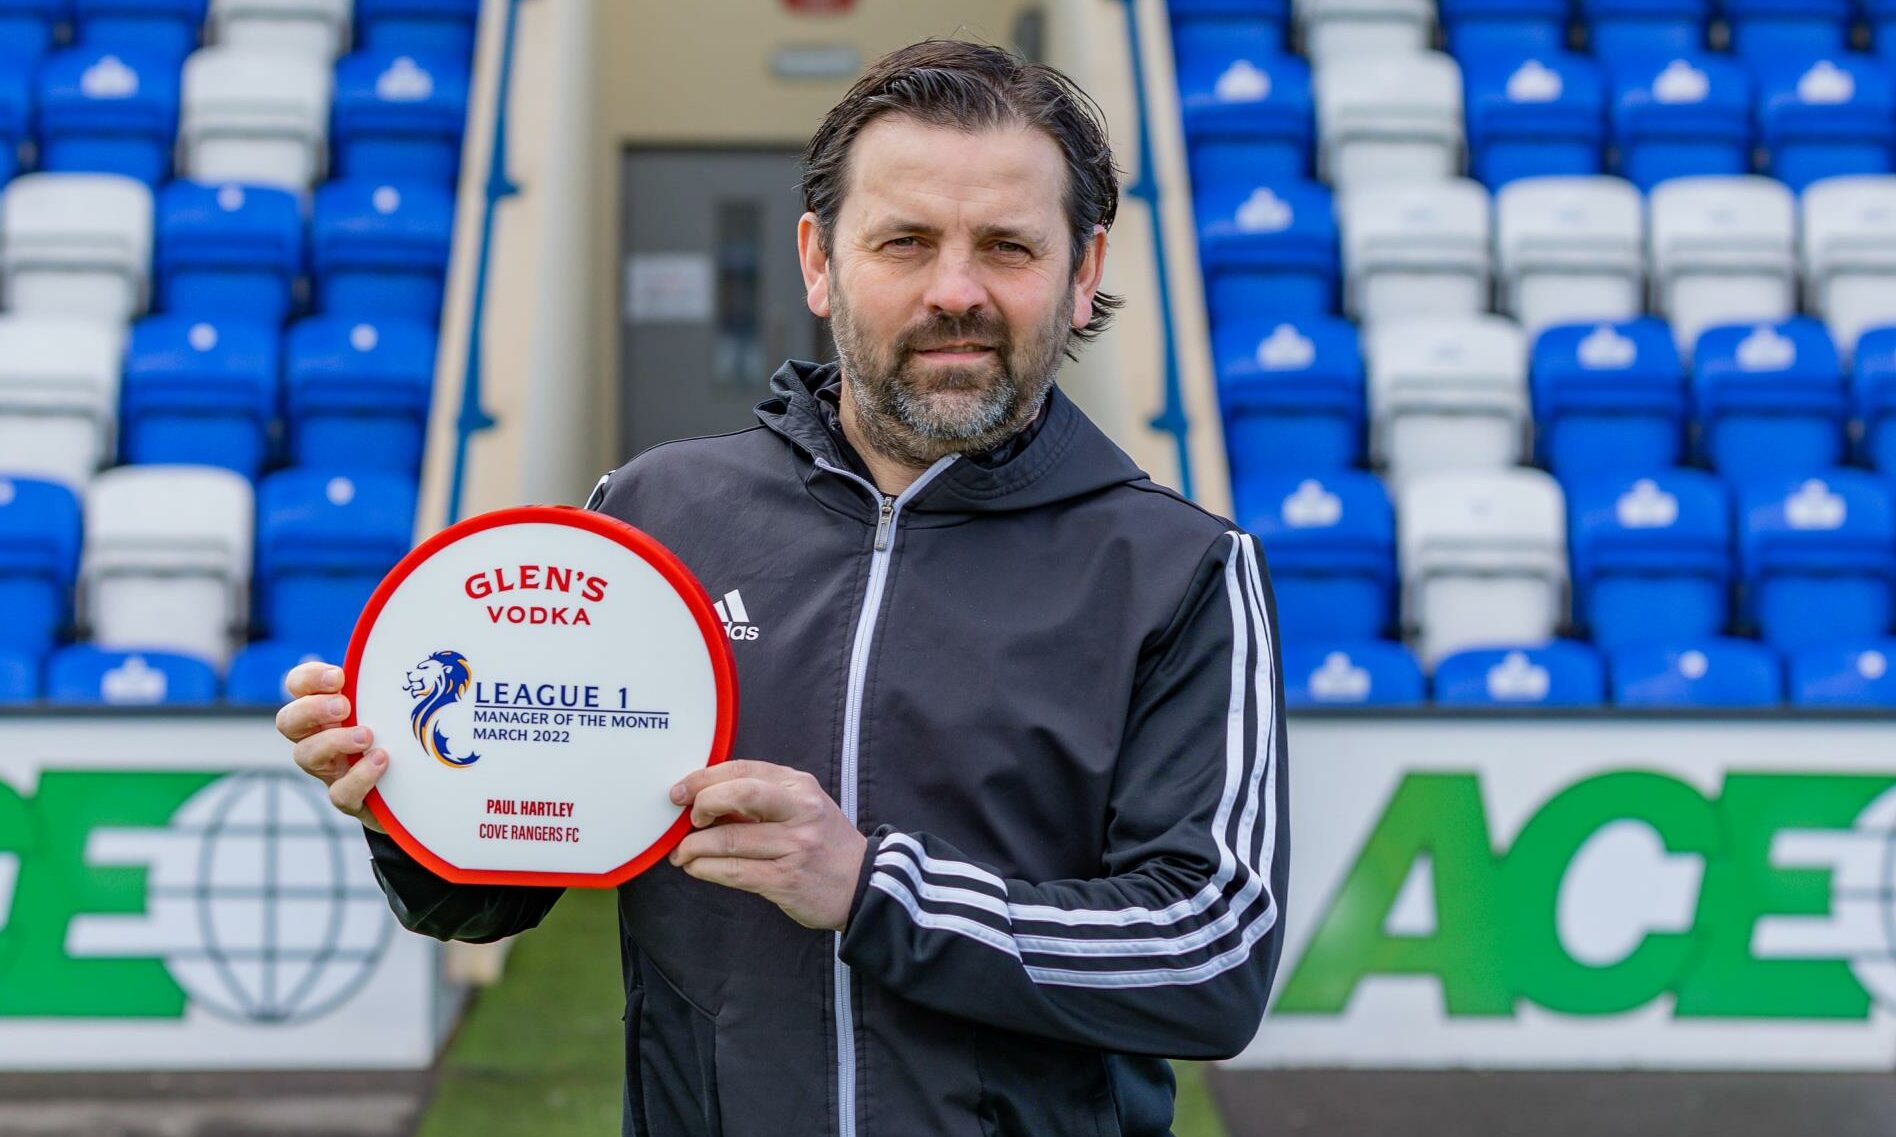 Paul Hartley Cove Rangers FC presented with the Glens Manager of the Month award for March 25v245v2v e1648812427685.